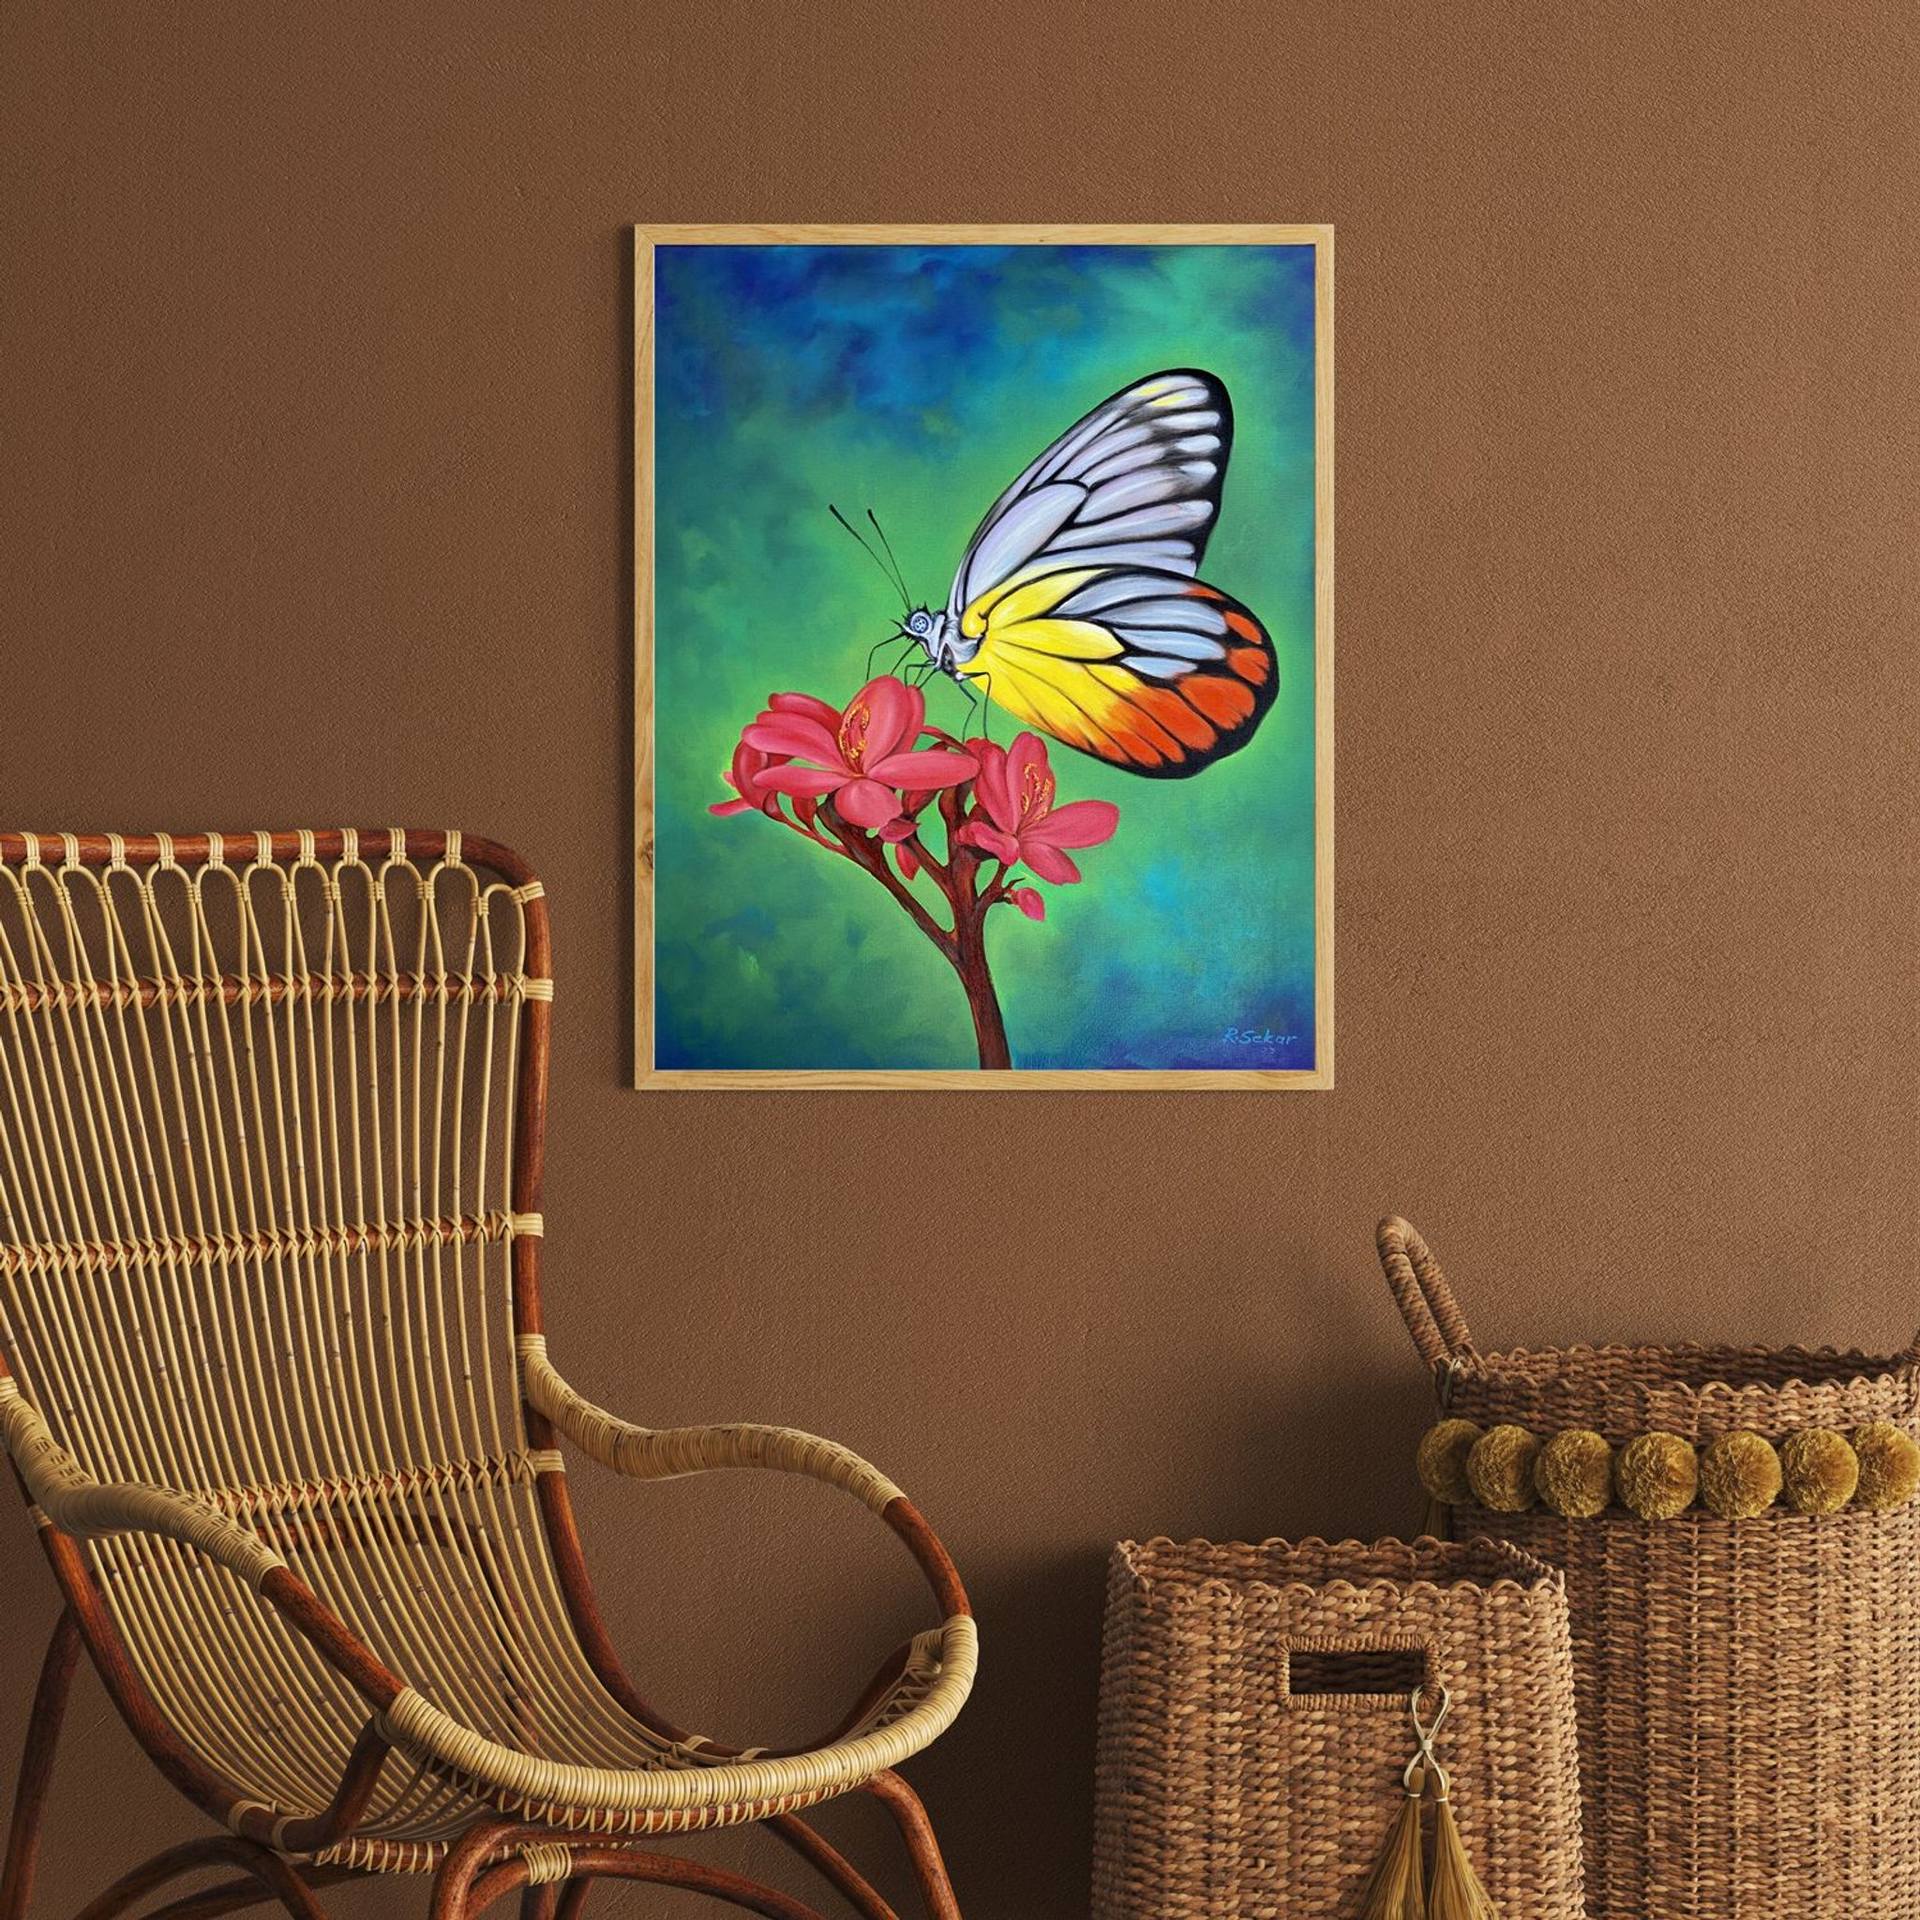 Butterfly on Flower, Unique Original Oil Painting, 50 x 60 cm Painting by  Sekar Rajagopal